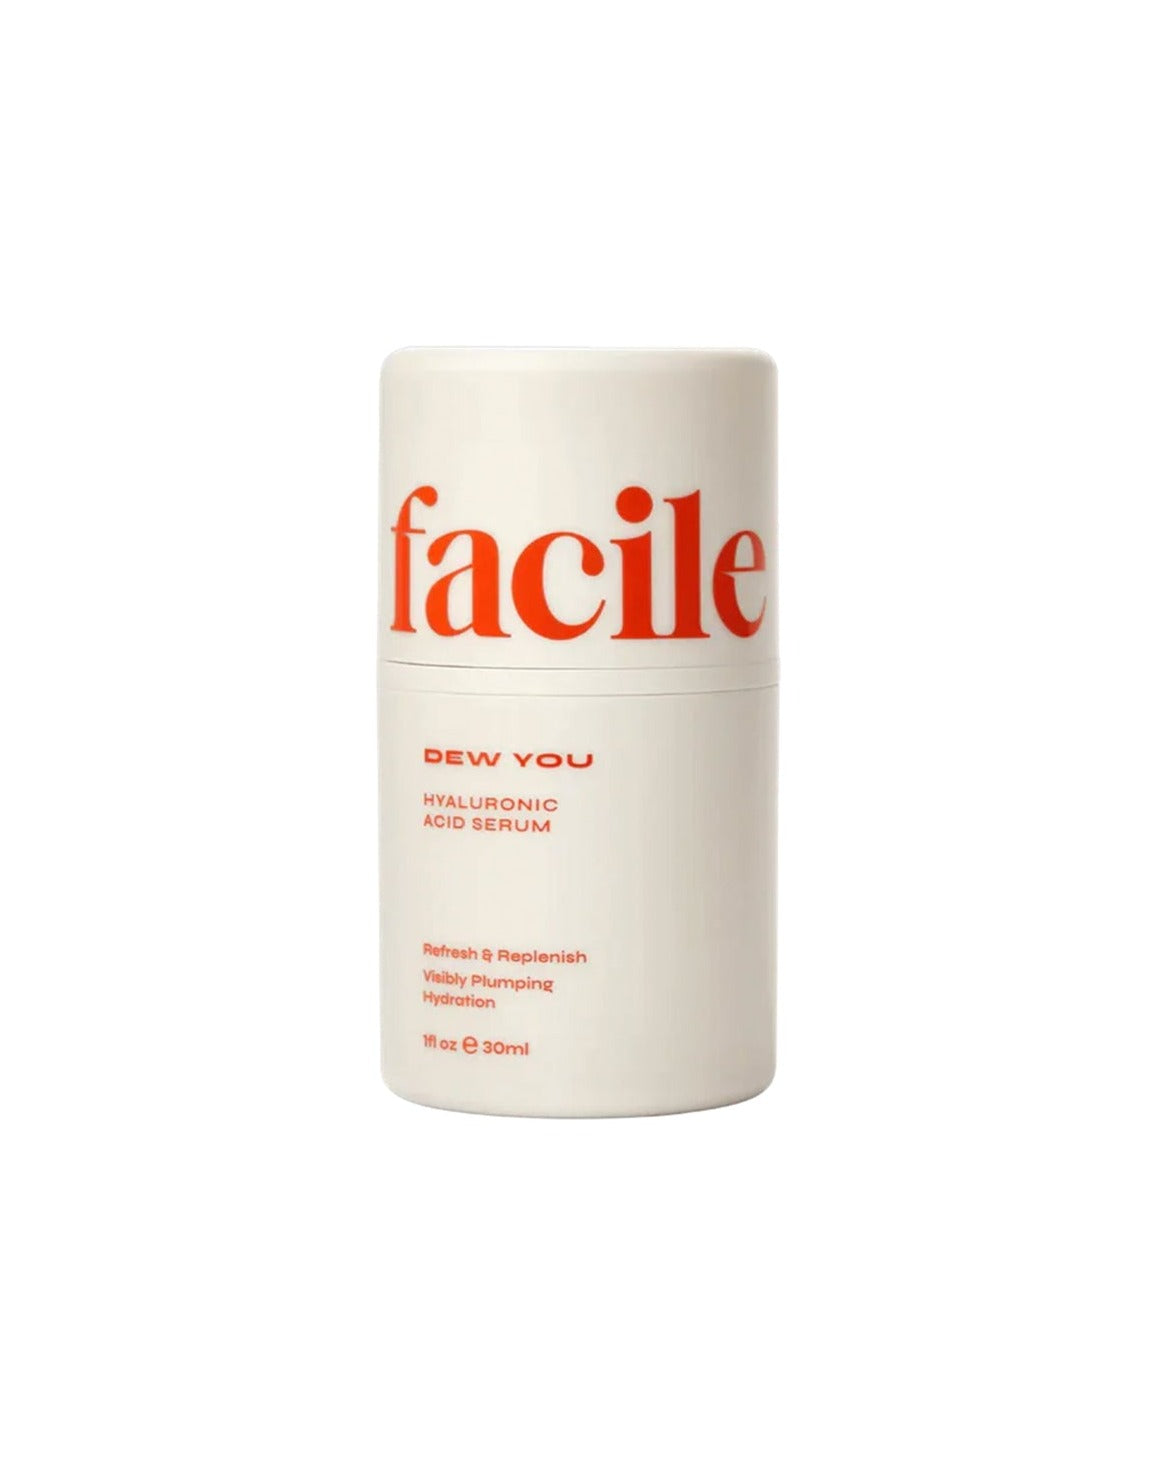 Facile Dew You Hyaluronic acid serum available at Ease Toronto